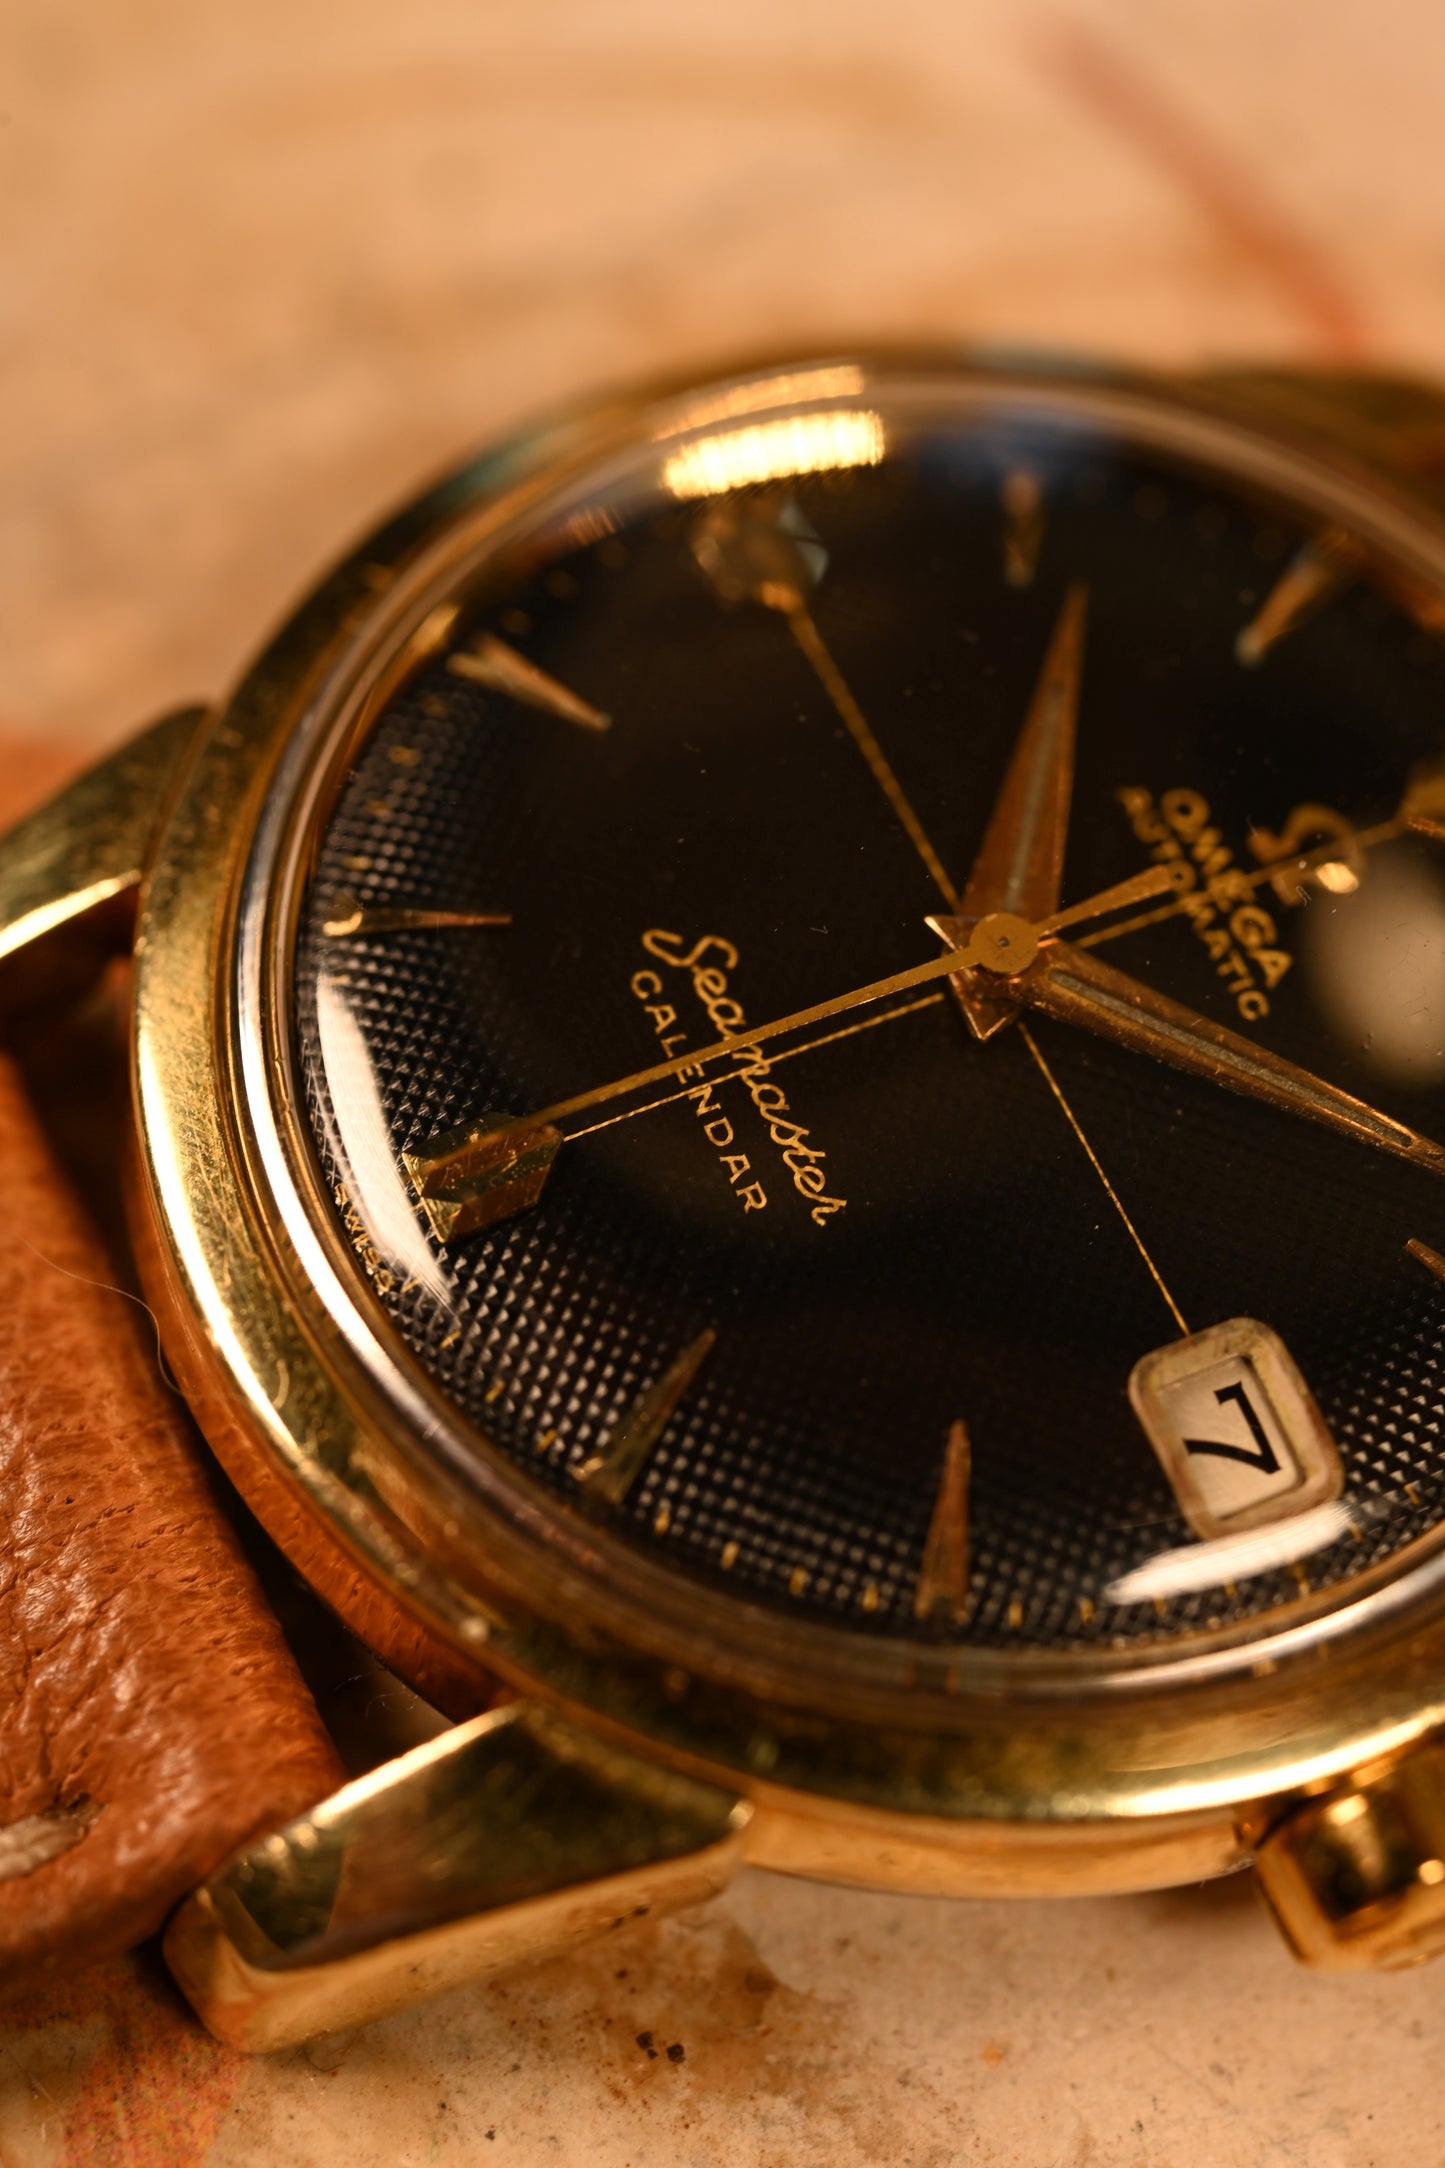 Omega Seamaster 2849 - Waffle/Honeycomb Gilt Dial - Serviced with 1 year warranty.